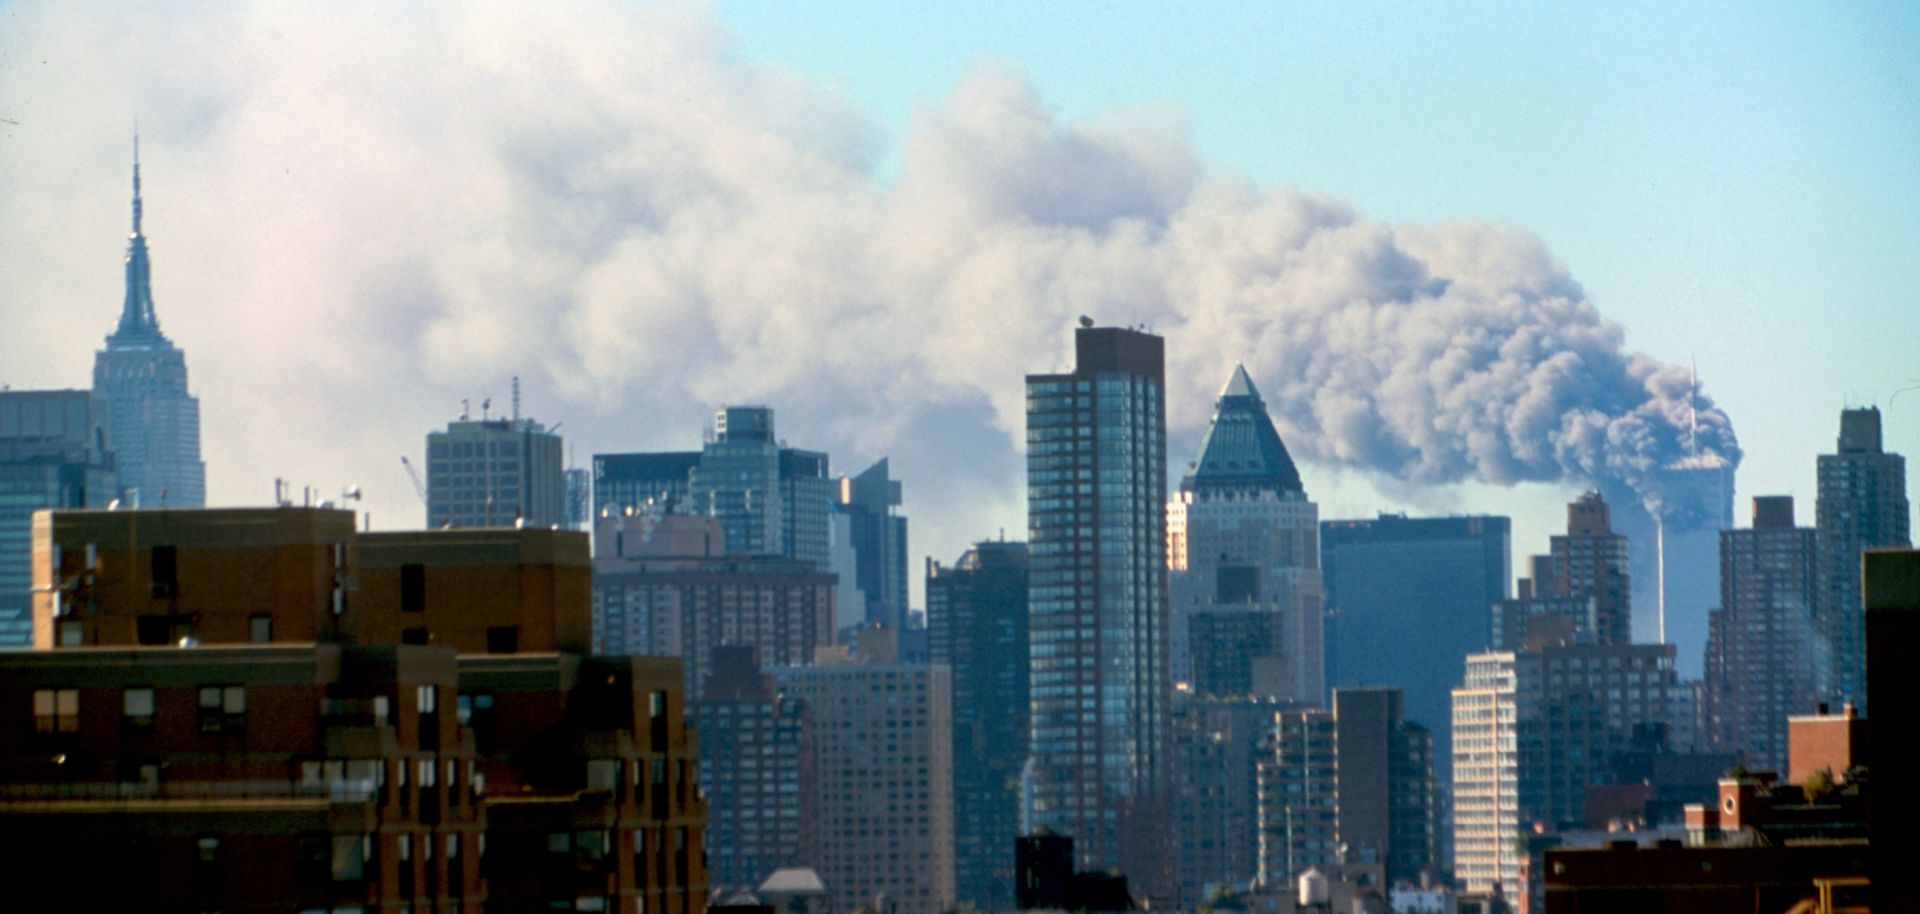 The 9/11 attacks against the United States were a watershed moment for the jihadist movement.